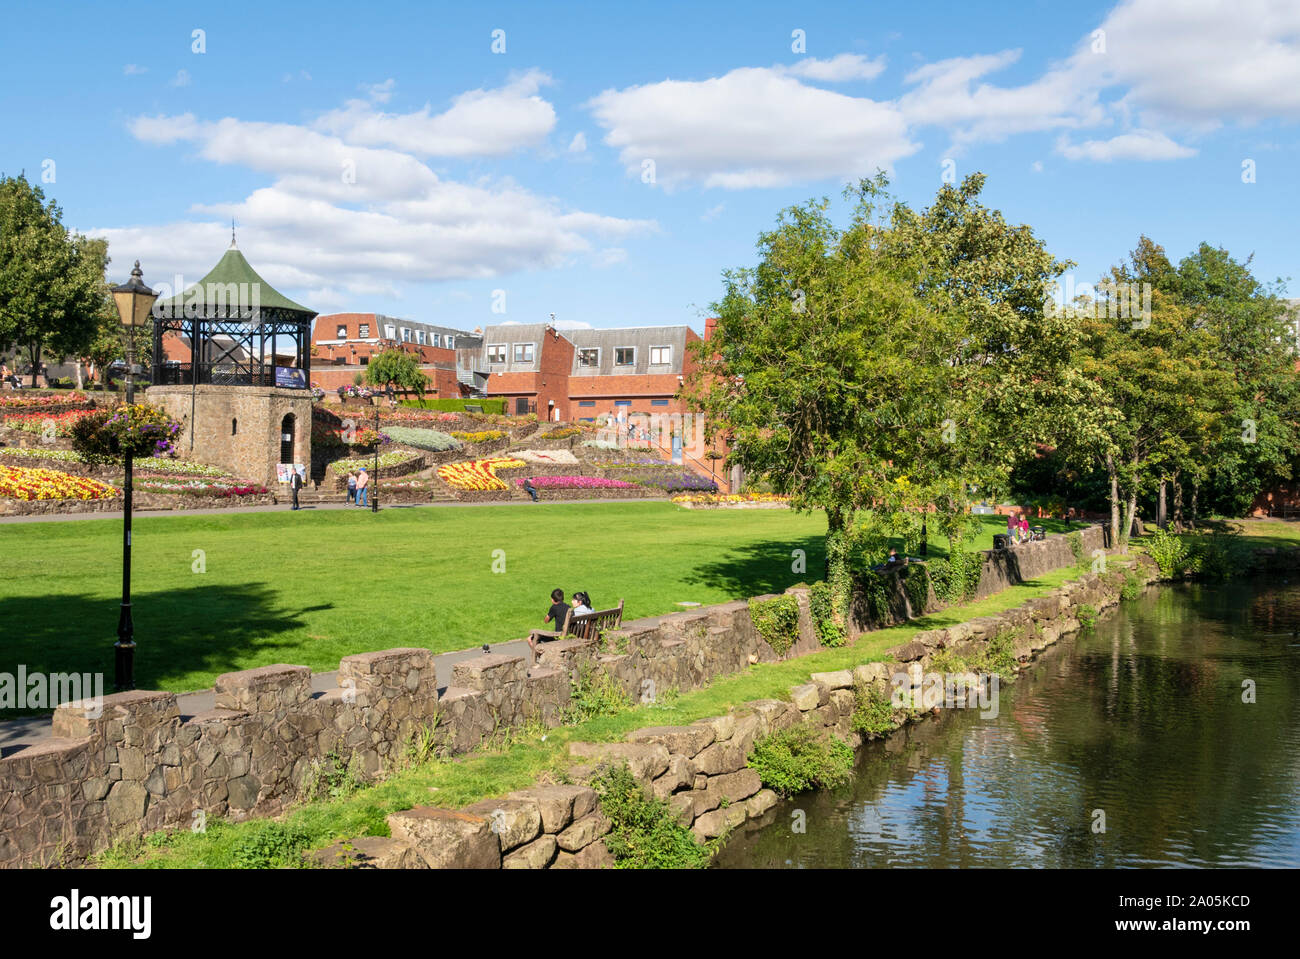 Tamworth castle gardens river anker and town bandstand town centre Staffordshire England UK GB UK Europe Stock Photo